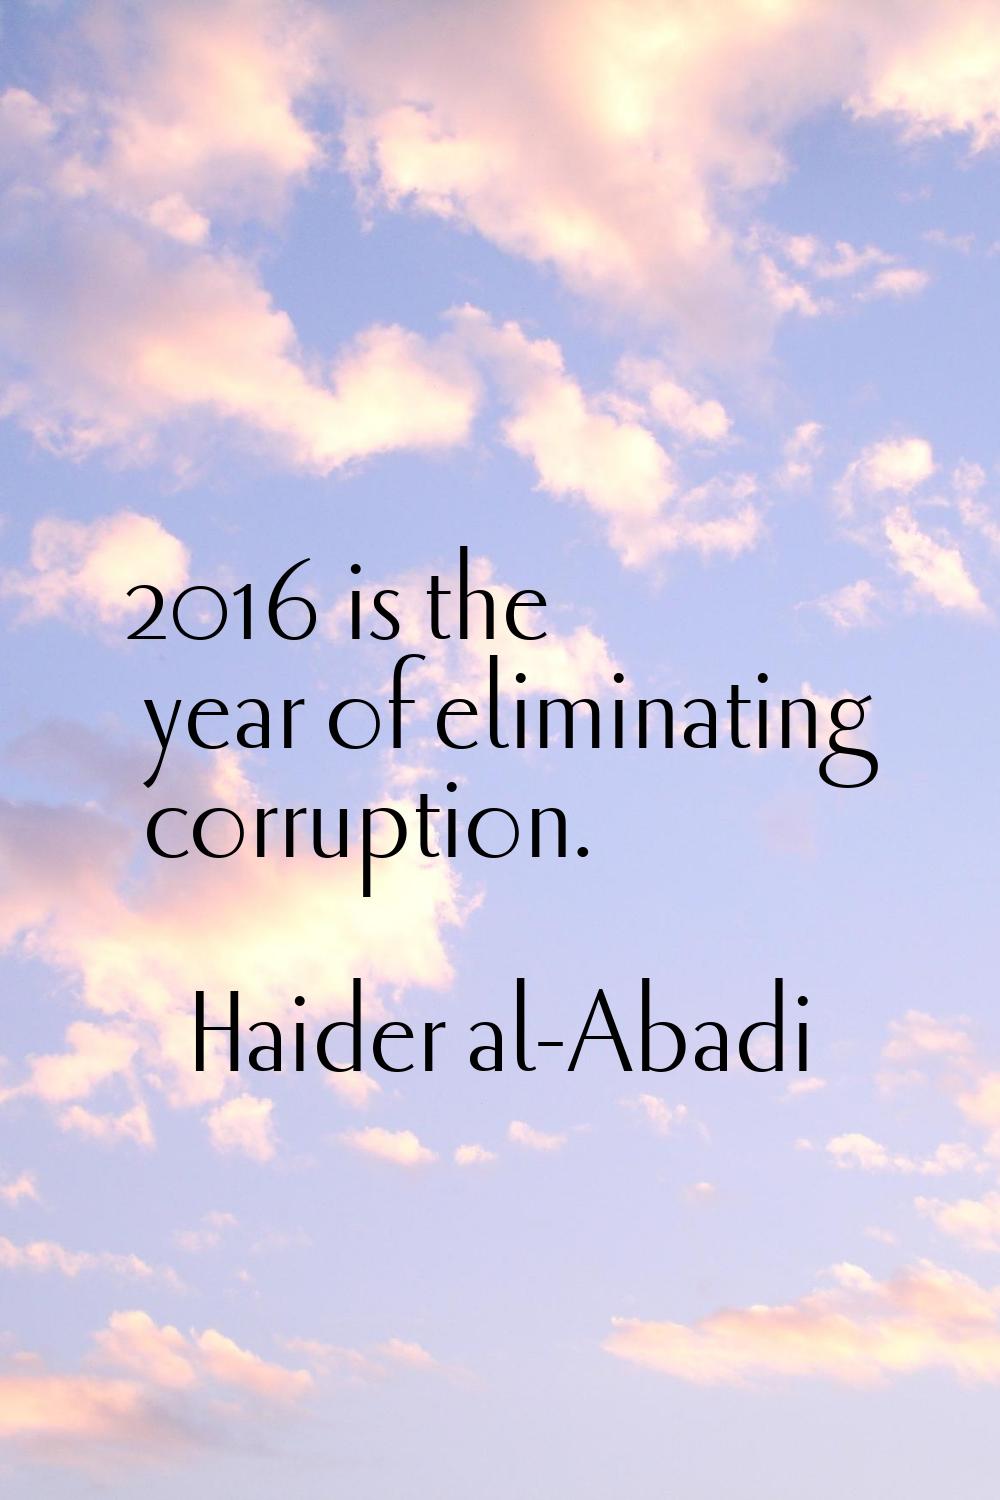 2016 is the year of eliminating corruption.